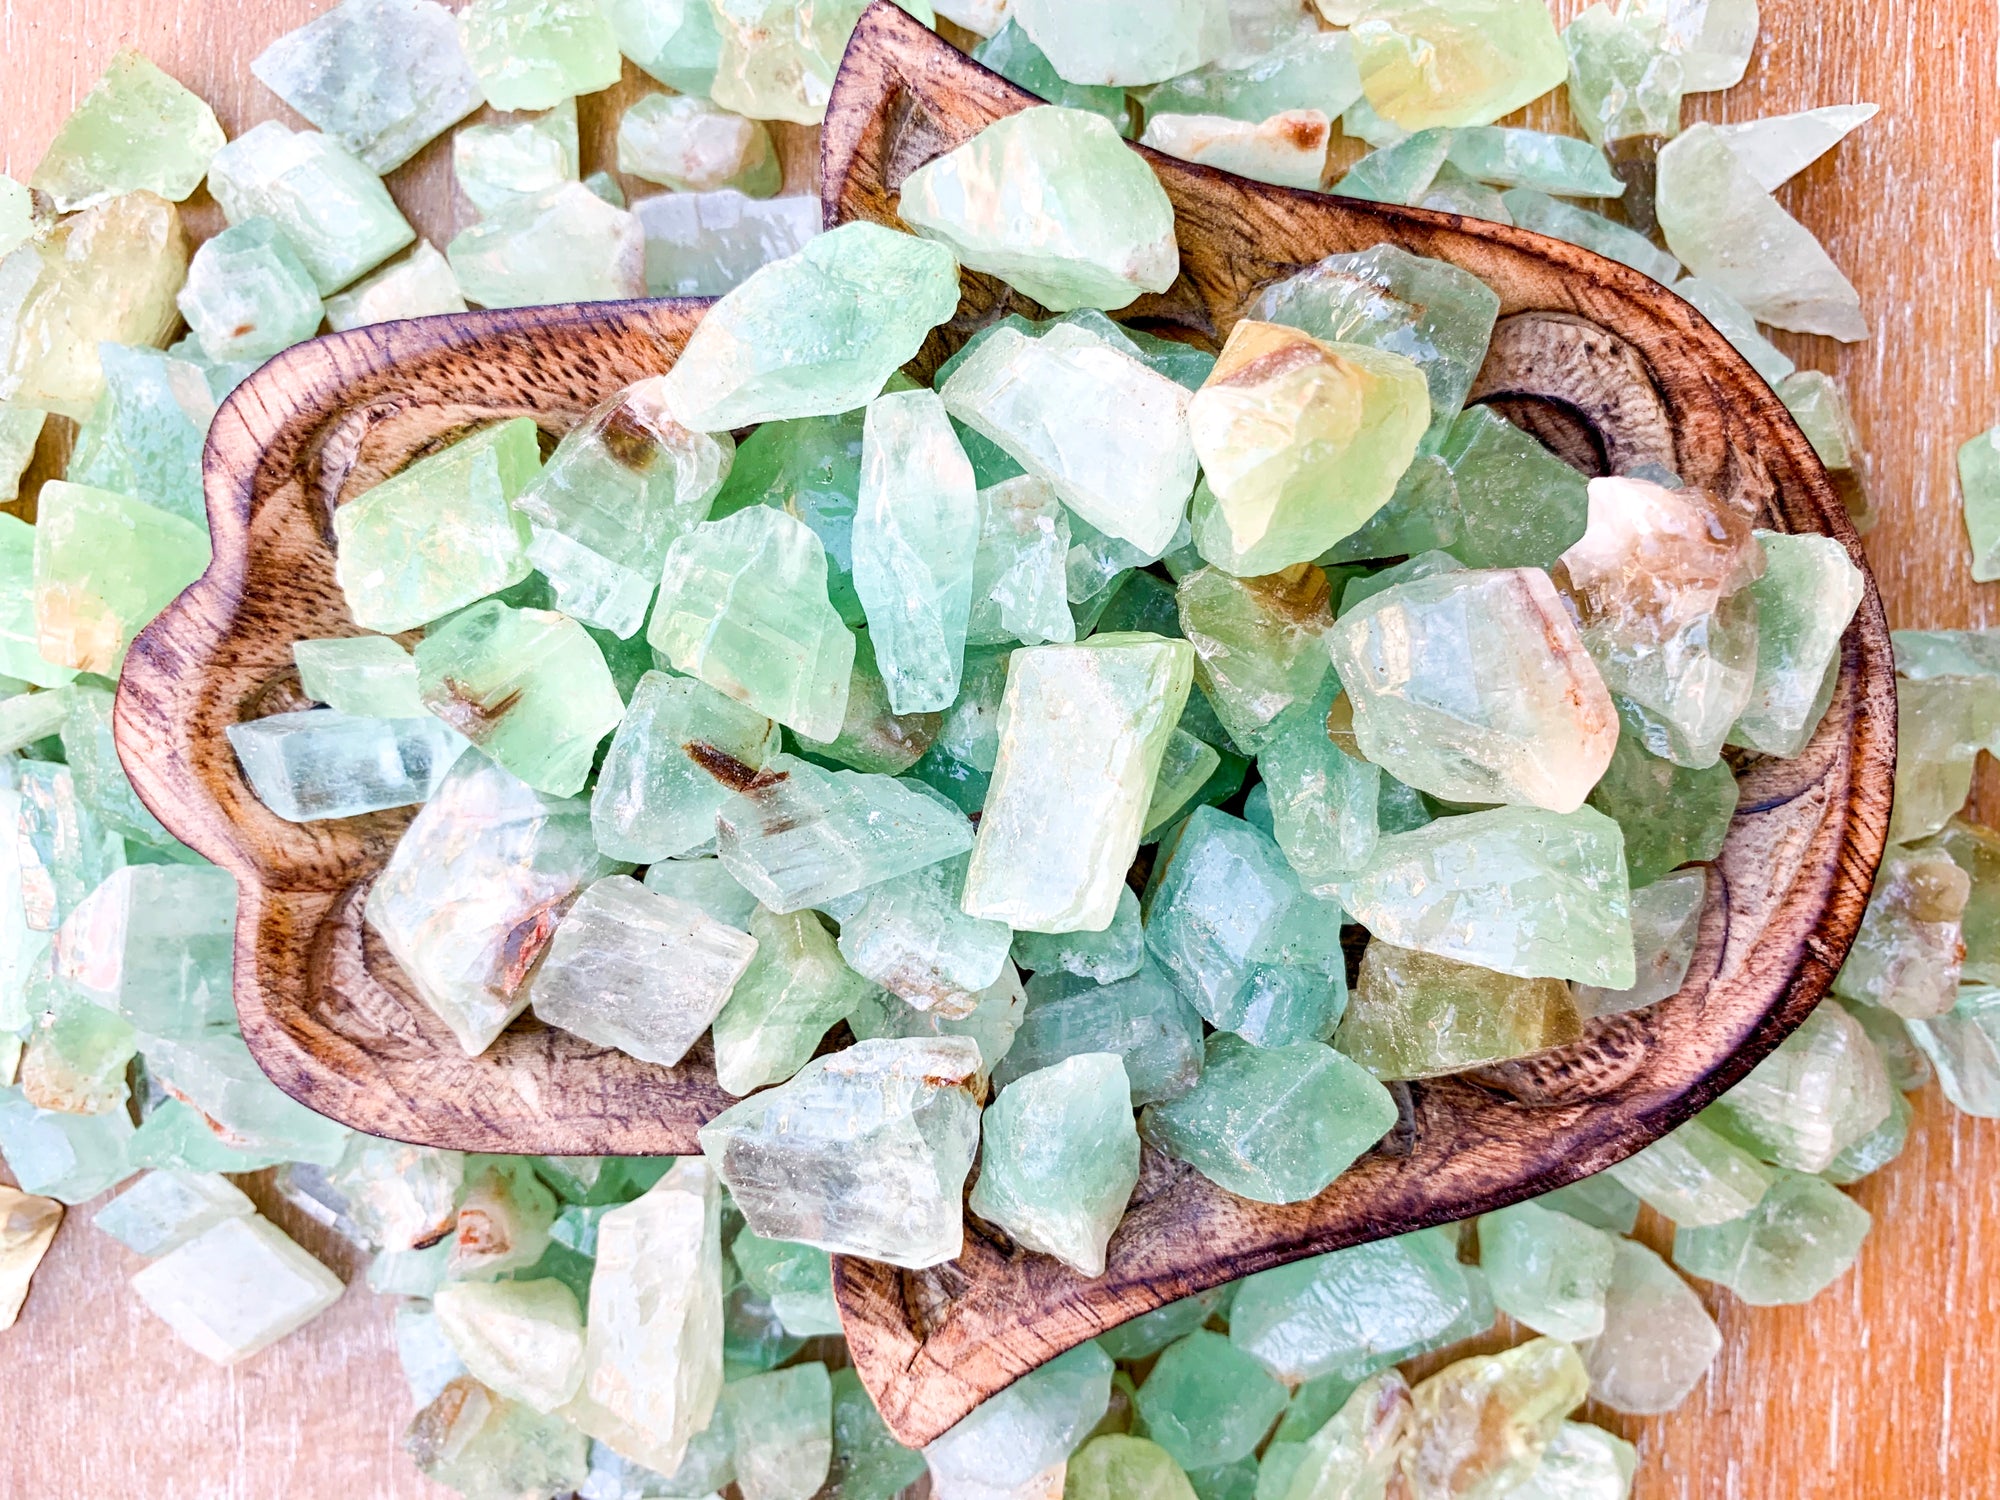 Green Calcite Rough Tumbled Stone - Large